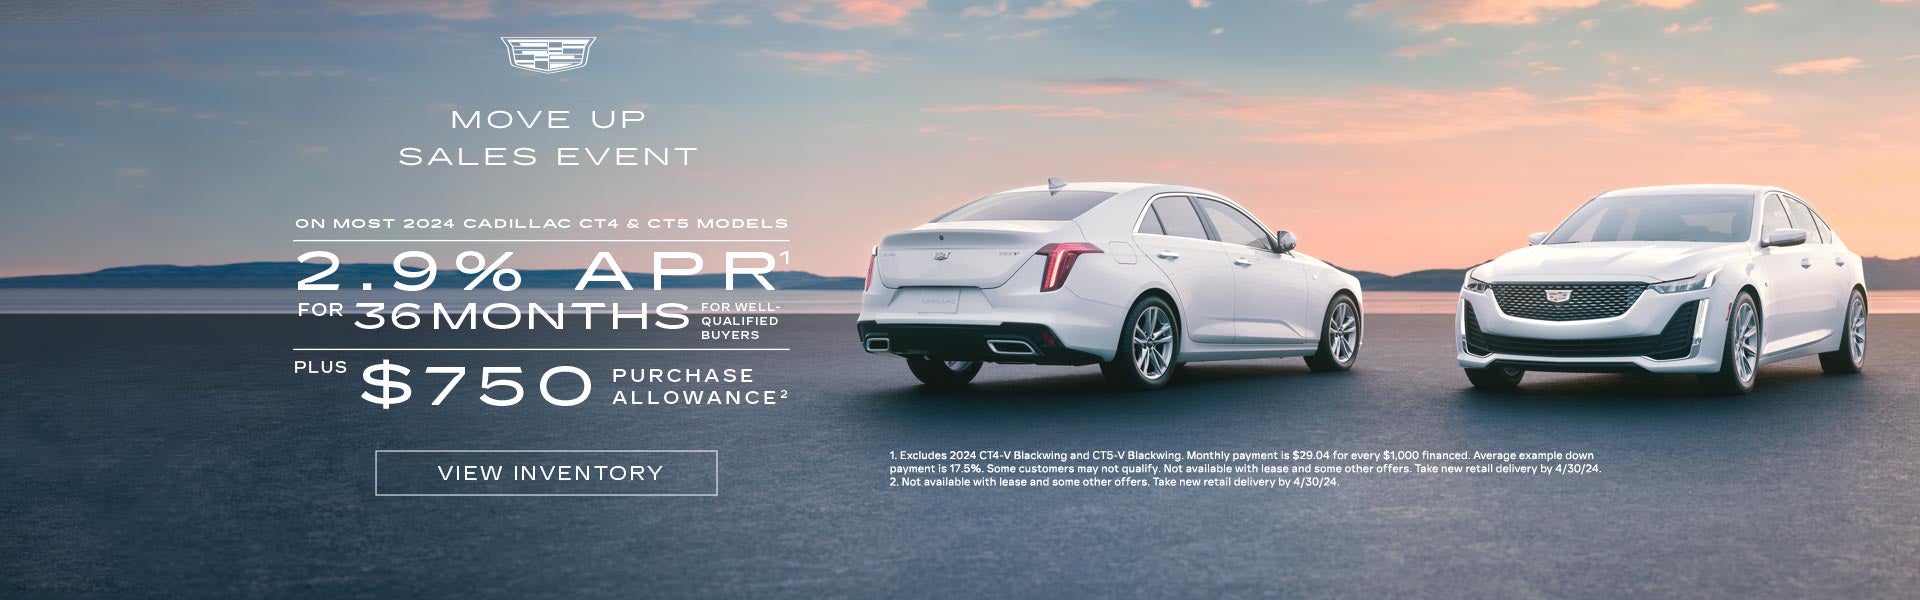 ON Most 2024 Cadillac CT4 and CT5 models. 2.9% APR for 36 months for well qualified buyers. Plus ...